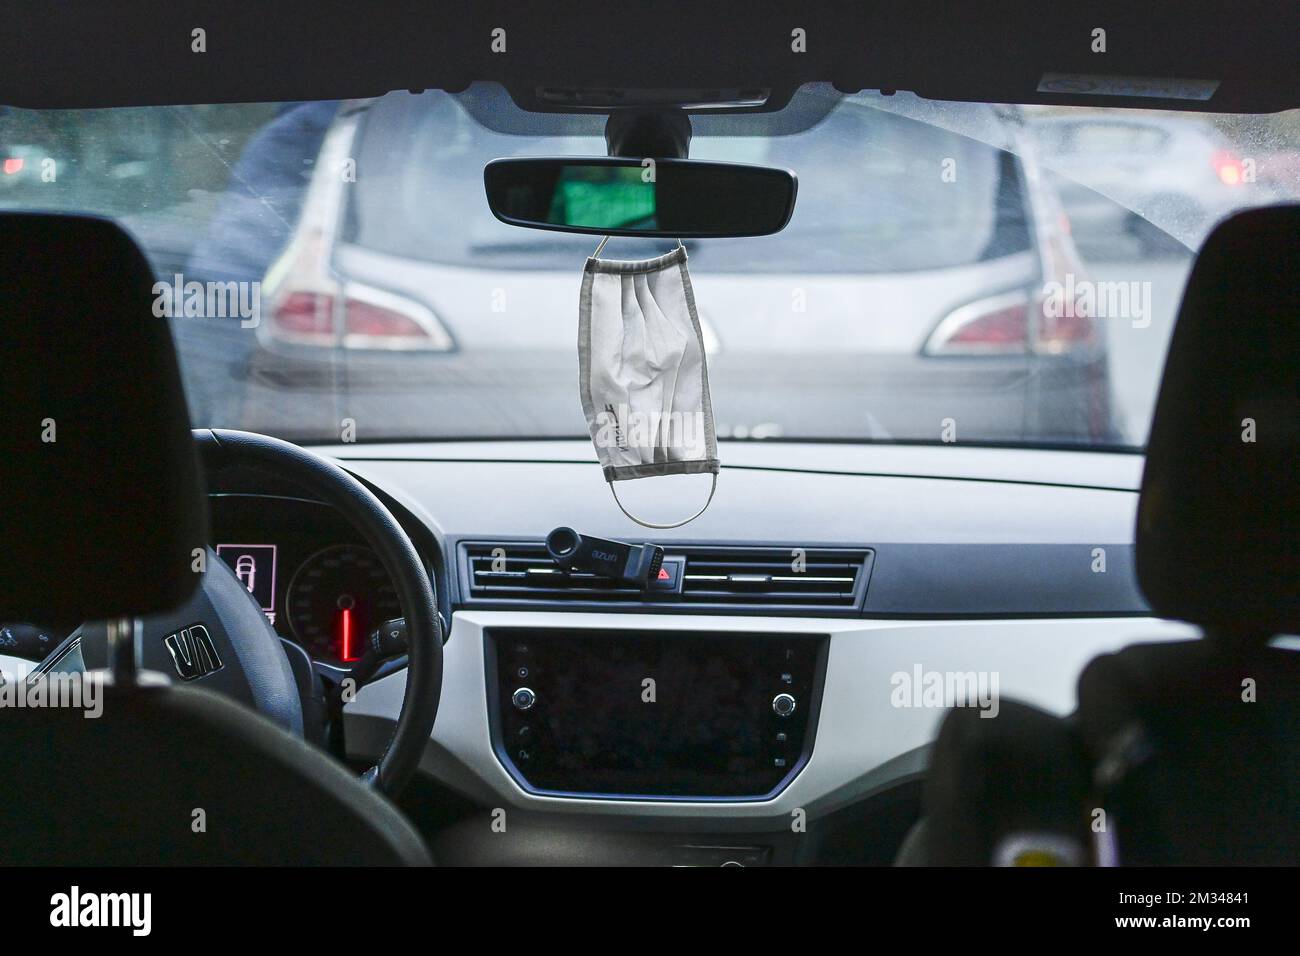 https://c8.alamy.com/comp/2M34841/illustration-picture-shows-a-mouth-mask-hanging-from-the-interior-rearview-mirror-of-a-car-in-brussels-tuesday-12-january-2021-the-vias-institute-for-road-safety-warns-that-the-masks-may-be-unsafe-as-it-obstructs-the-view-and-can-be-a-source-of-distraction-for-the-driver-in-principle-police-officers-can-even-impose-fines-if-the-drivers-view-is-obstructed-by-an-unnecessary-object-belga-photo-laurie-dieffembacq-2M34841.jpg